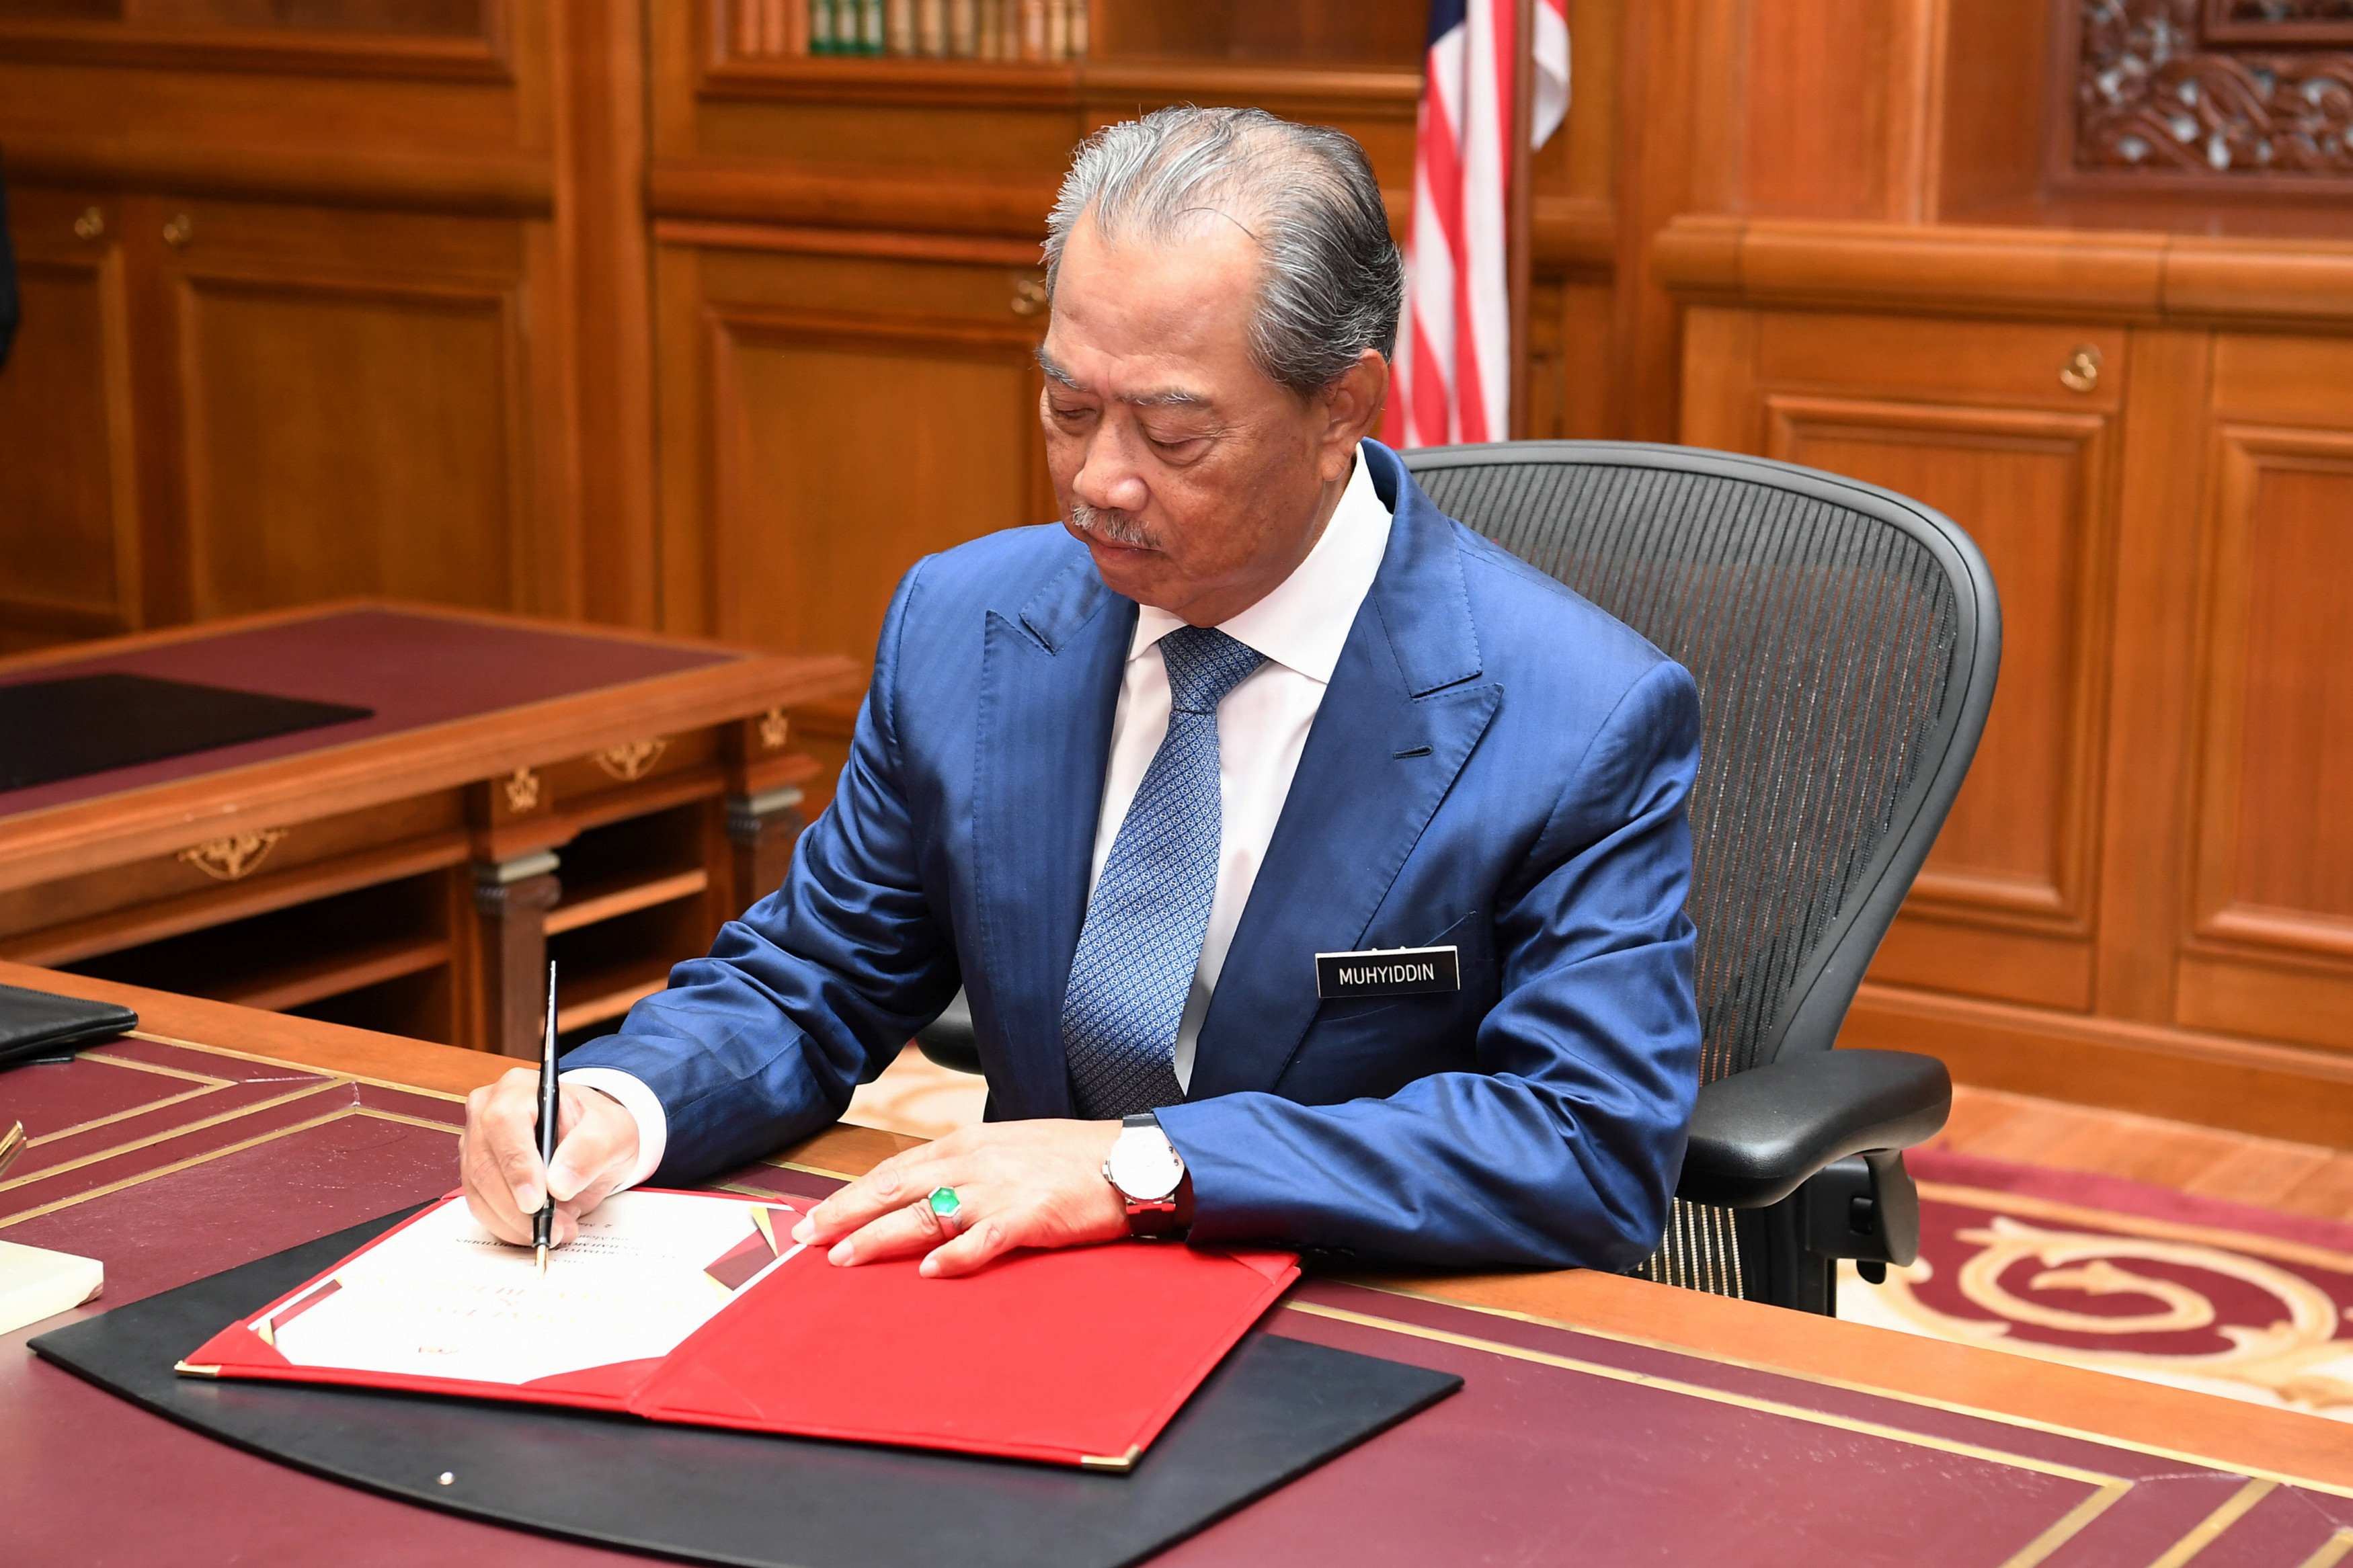 Additional RM160 mln approved to fight Covid-19 second wave – Muhyiddin